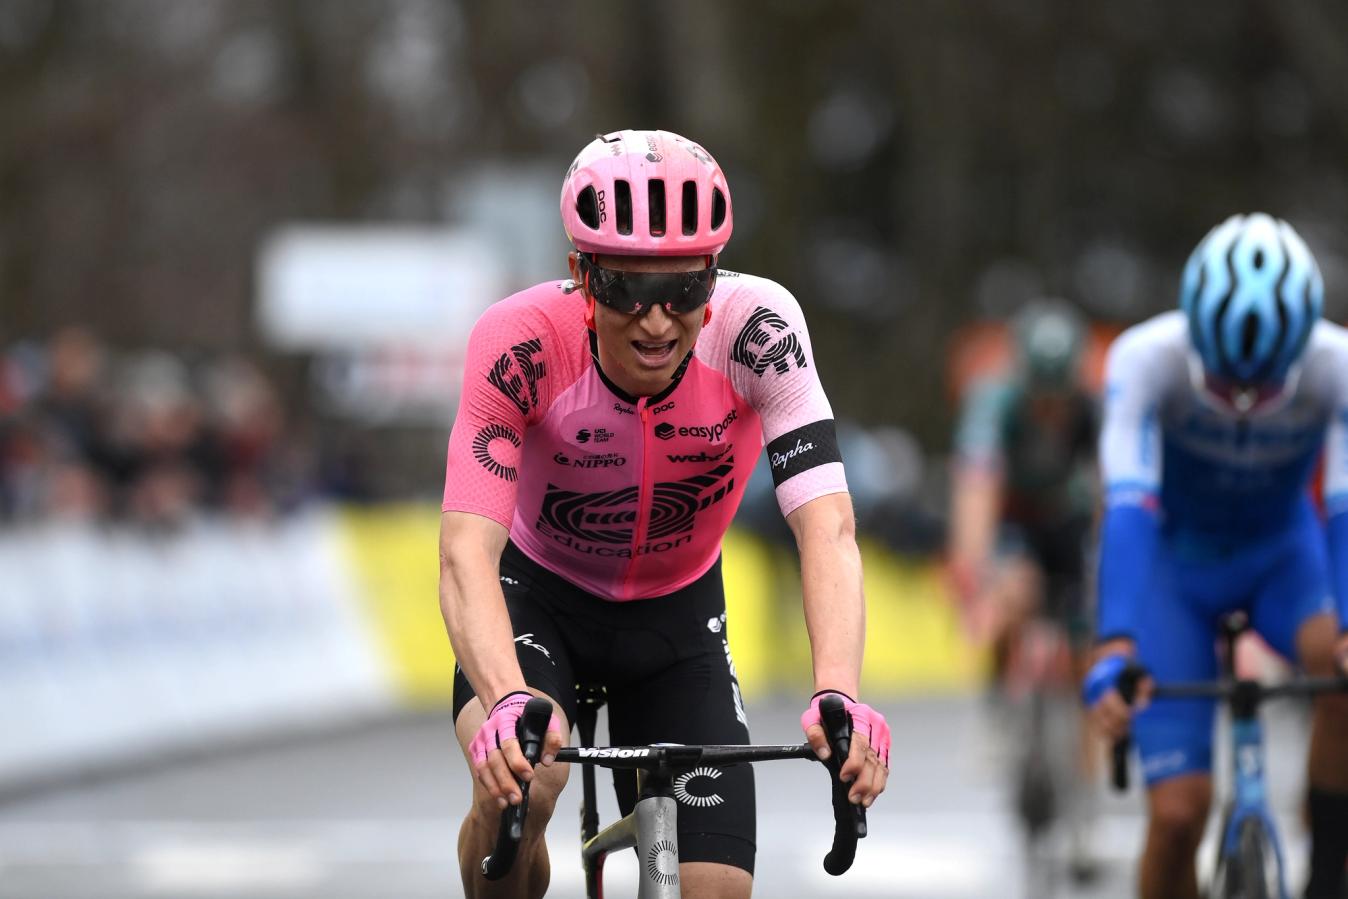 Neilson Powless impressed in the spring Classics and stage races.